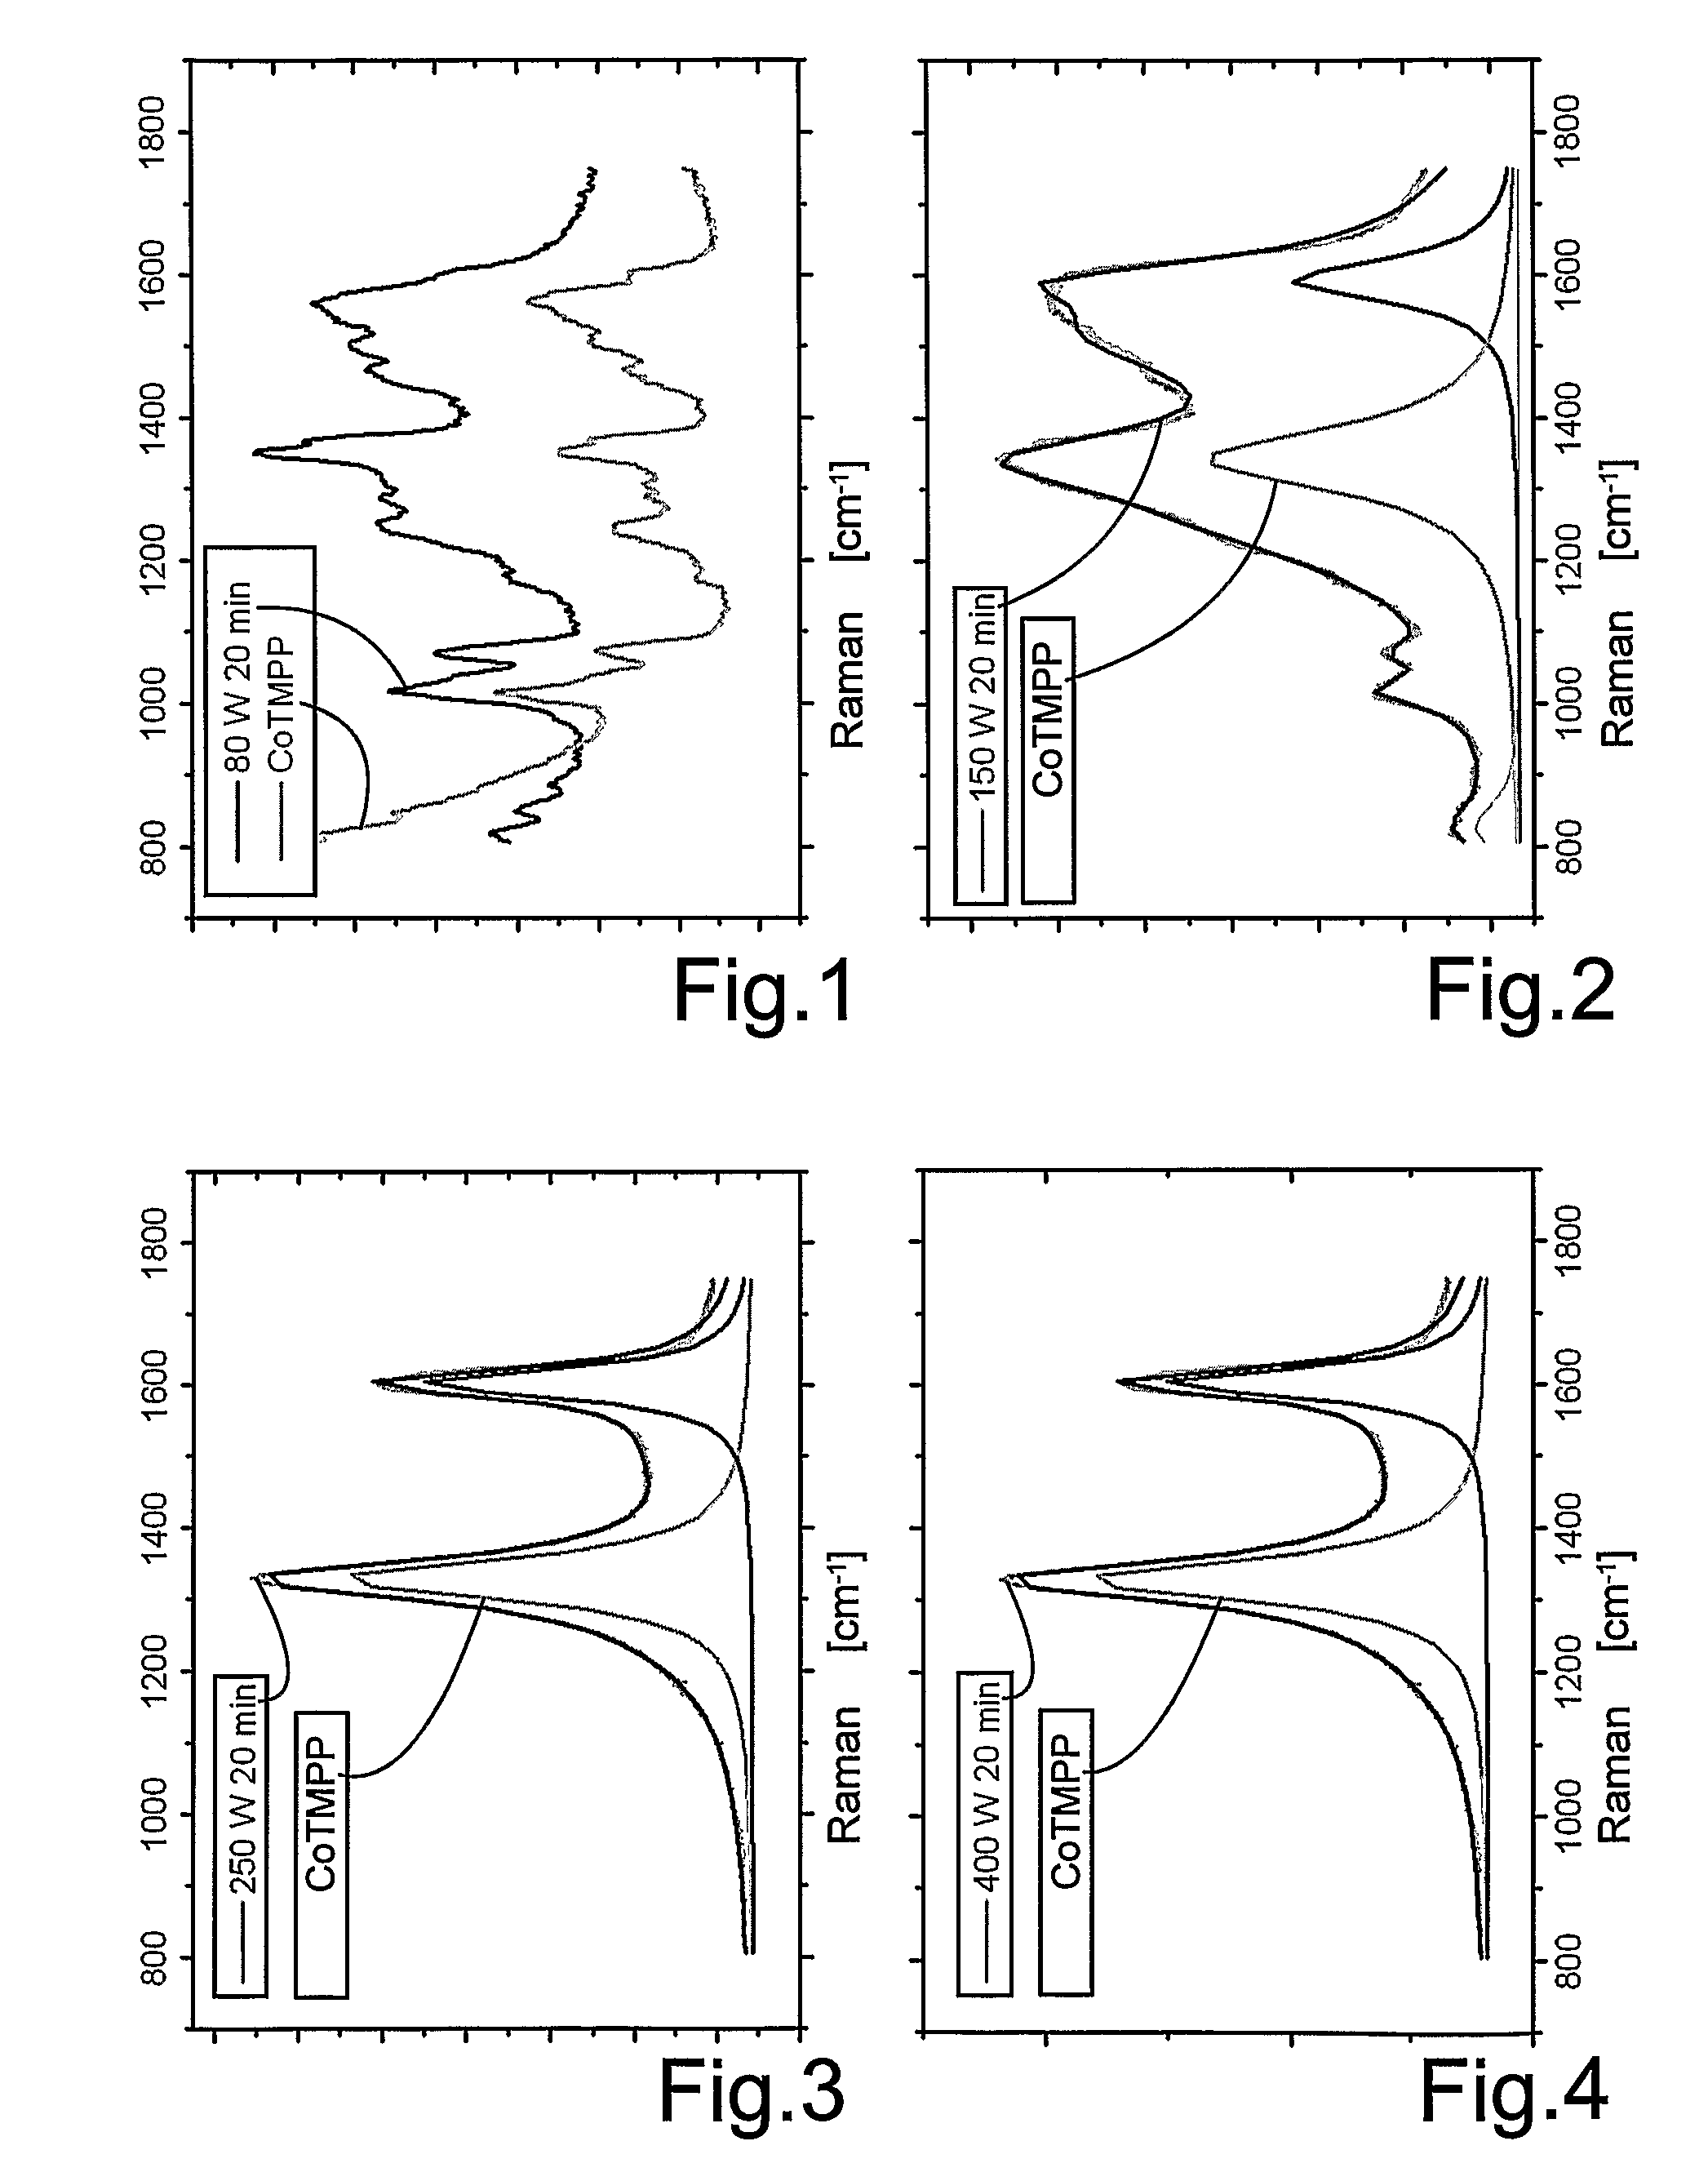 Production of a Platinum-Free Chelate Catalyst Material as an Intermediate Product, and Further Processing Thereof to Obtain an Electrocatalytic Coating as a Final Product